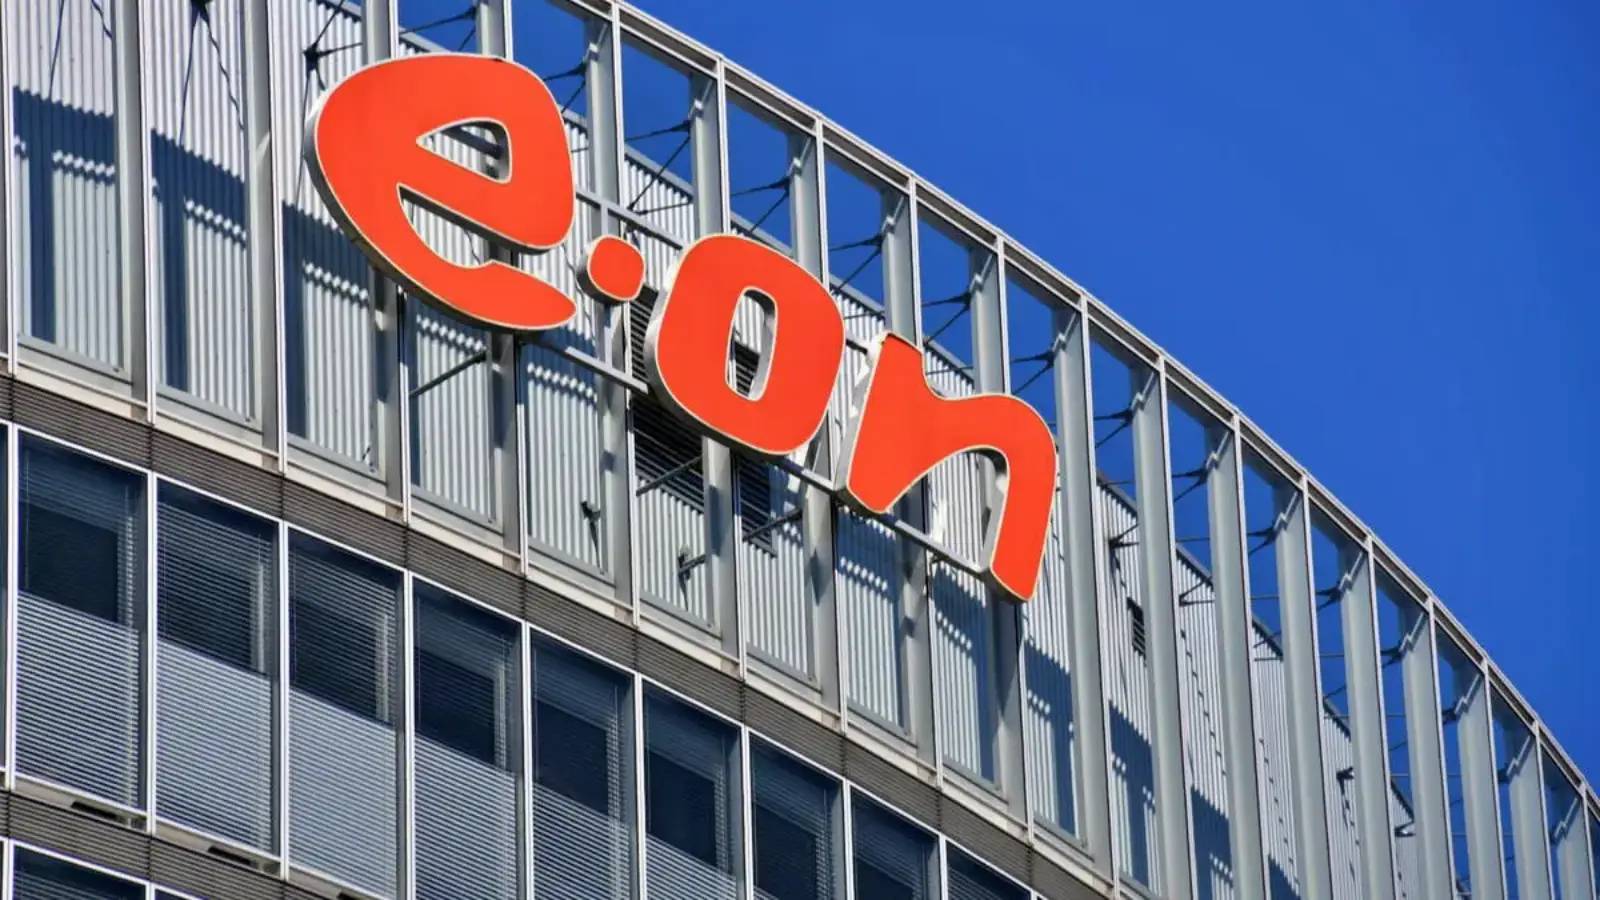 Official E.ON Messages LAST MINUTE ATTENTION All Romanian Customers